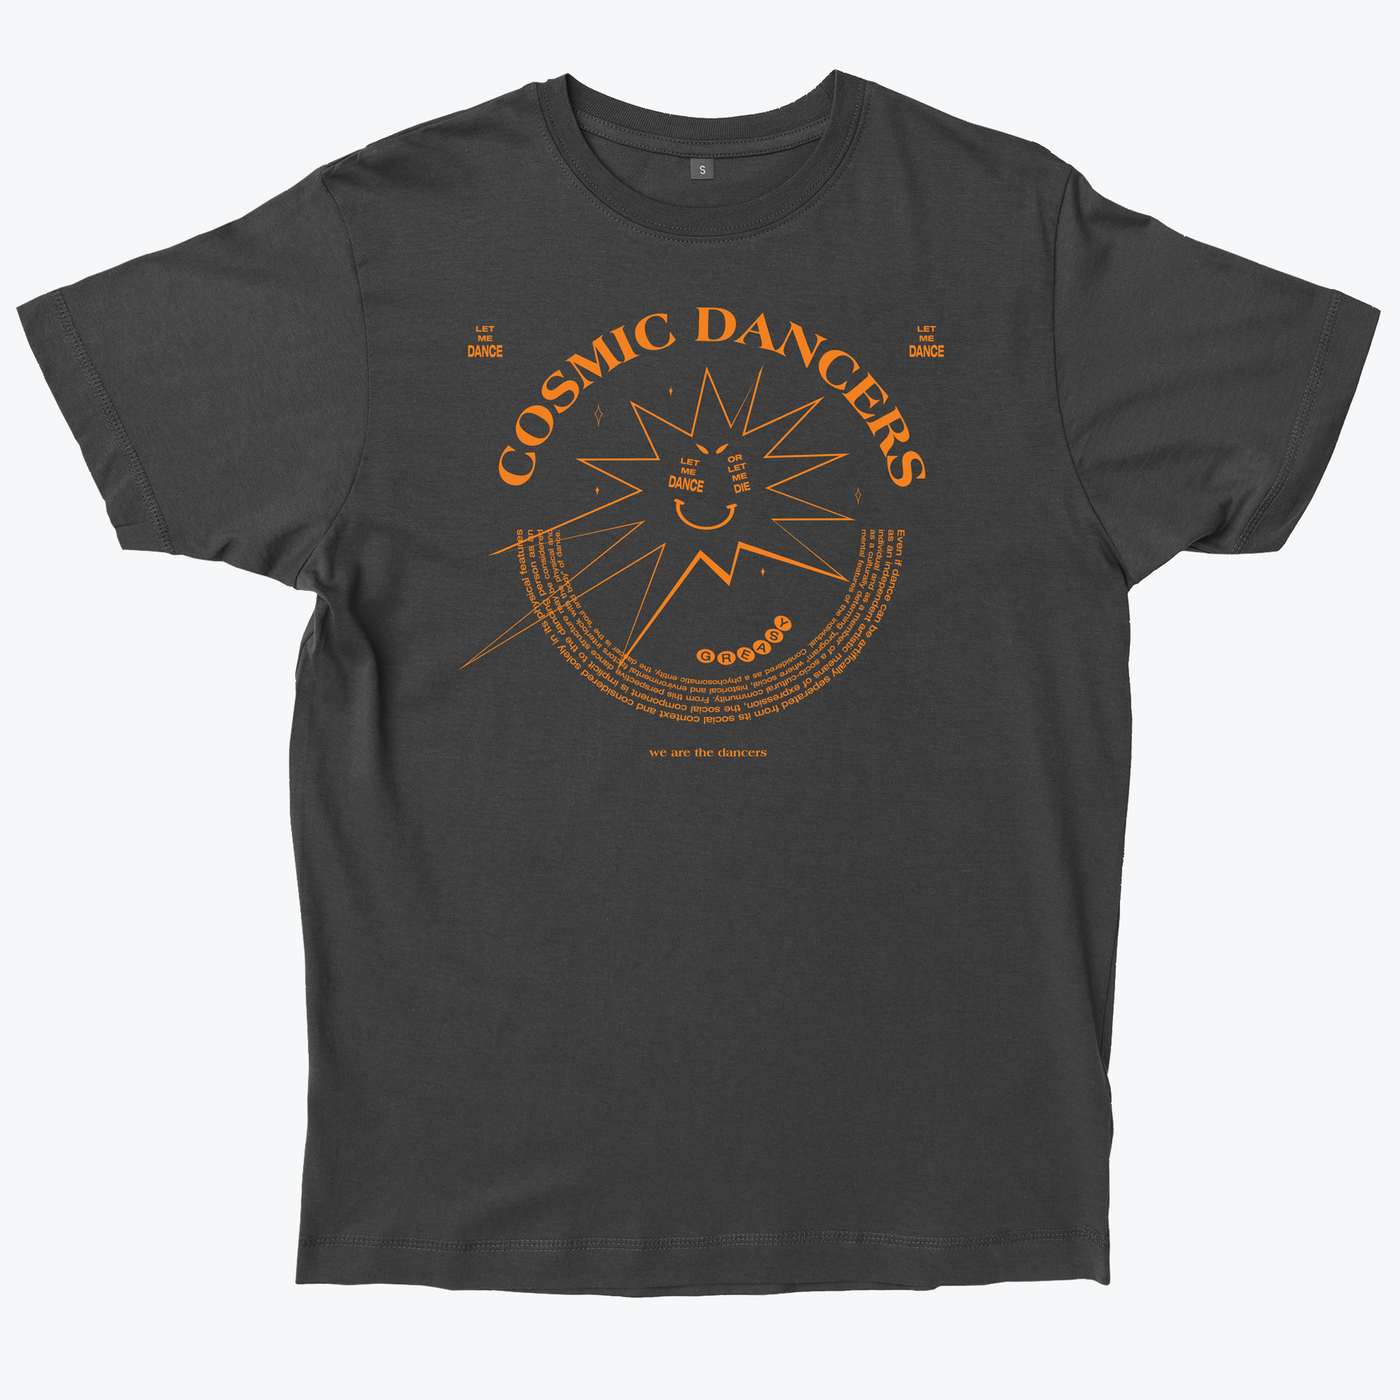 Greasy Fingers Gang's 'Let Me Dance' T-shirt